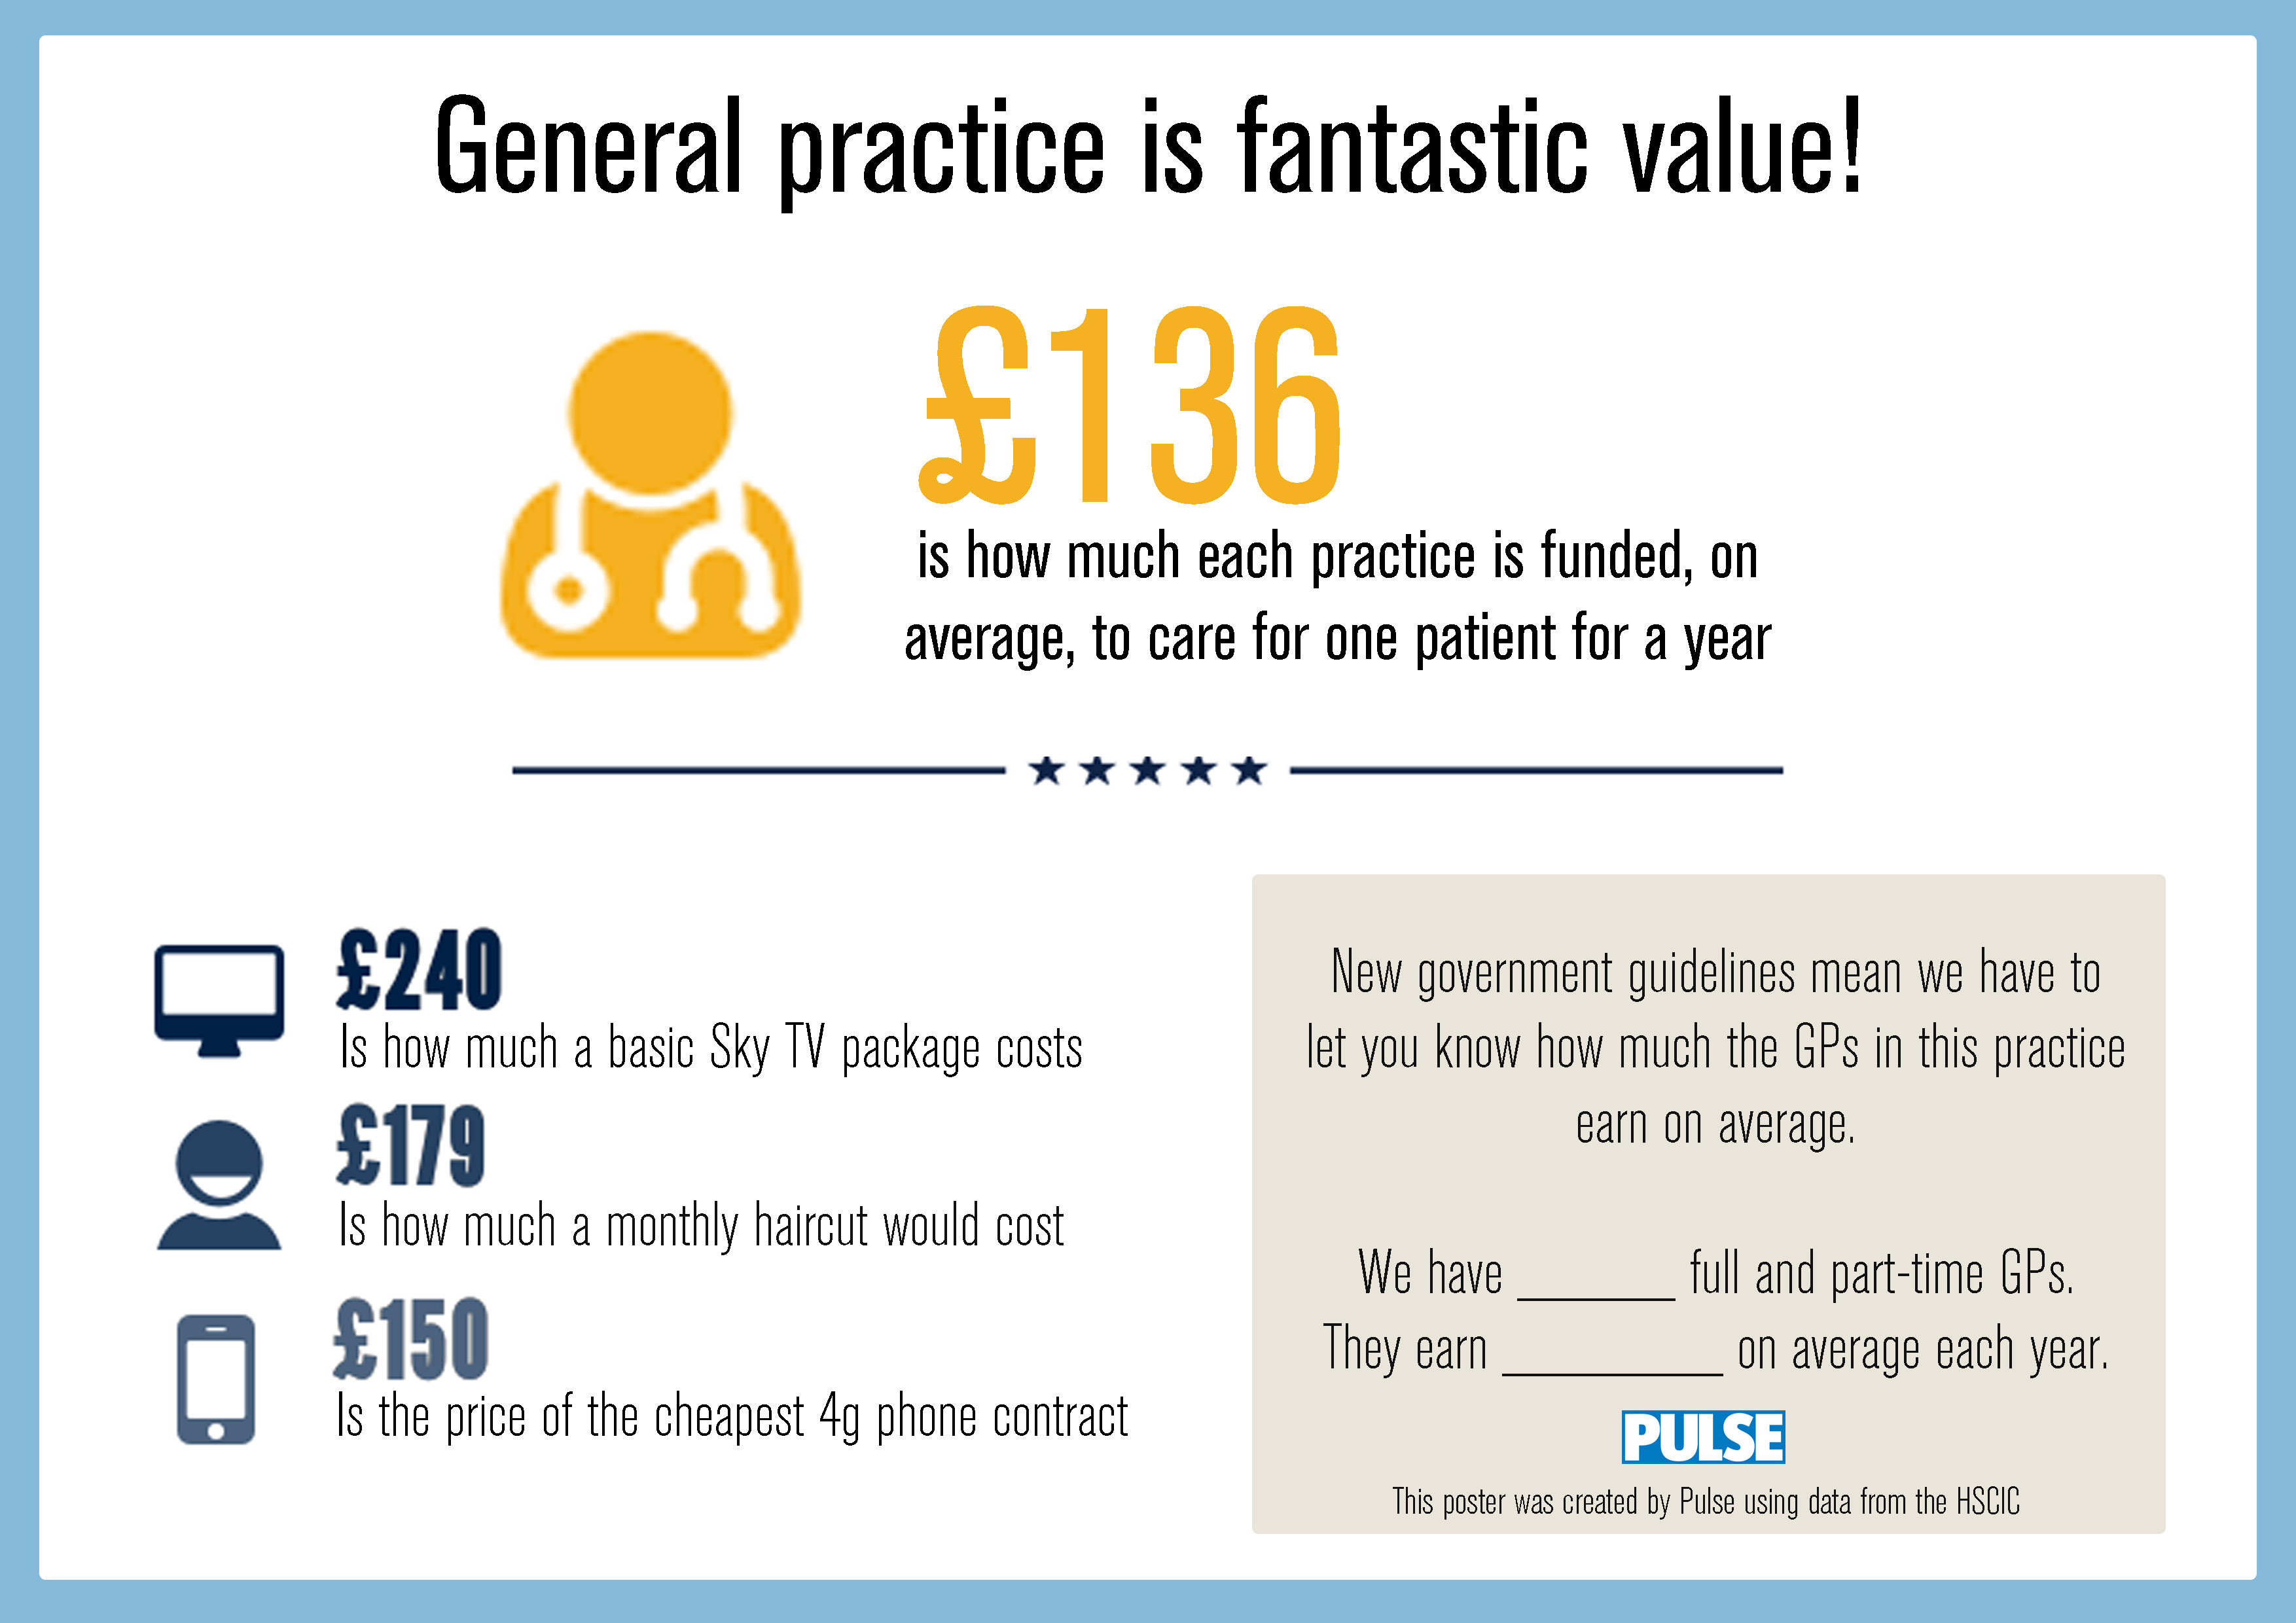 gp wages poster 3